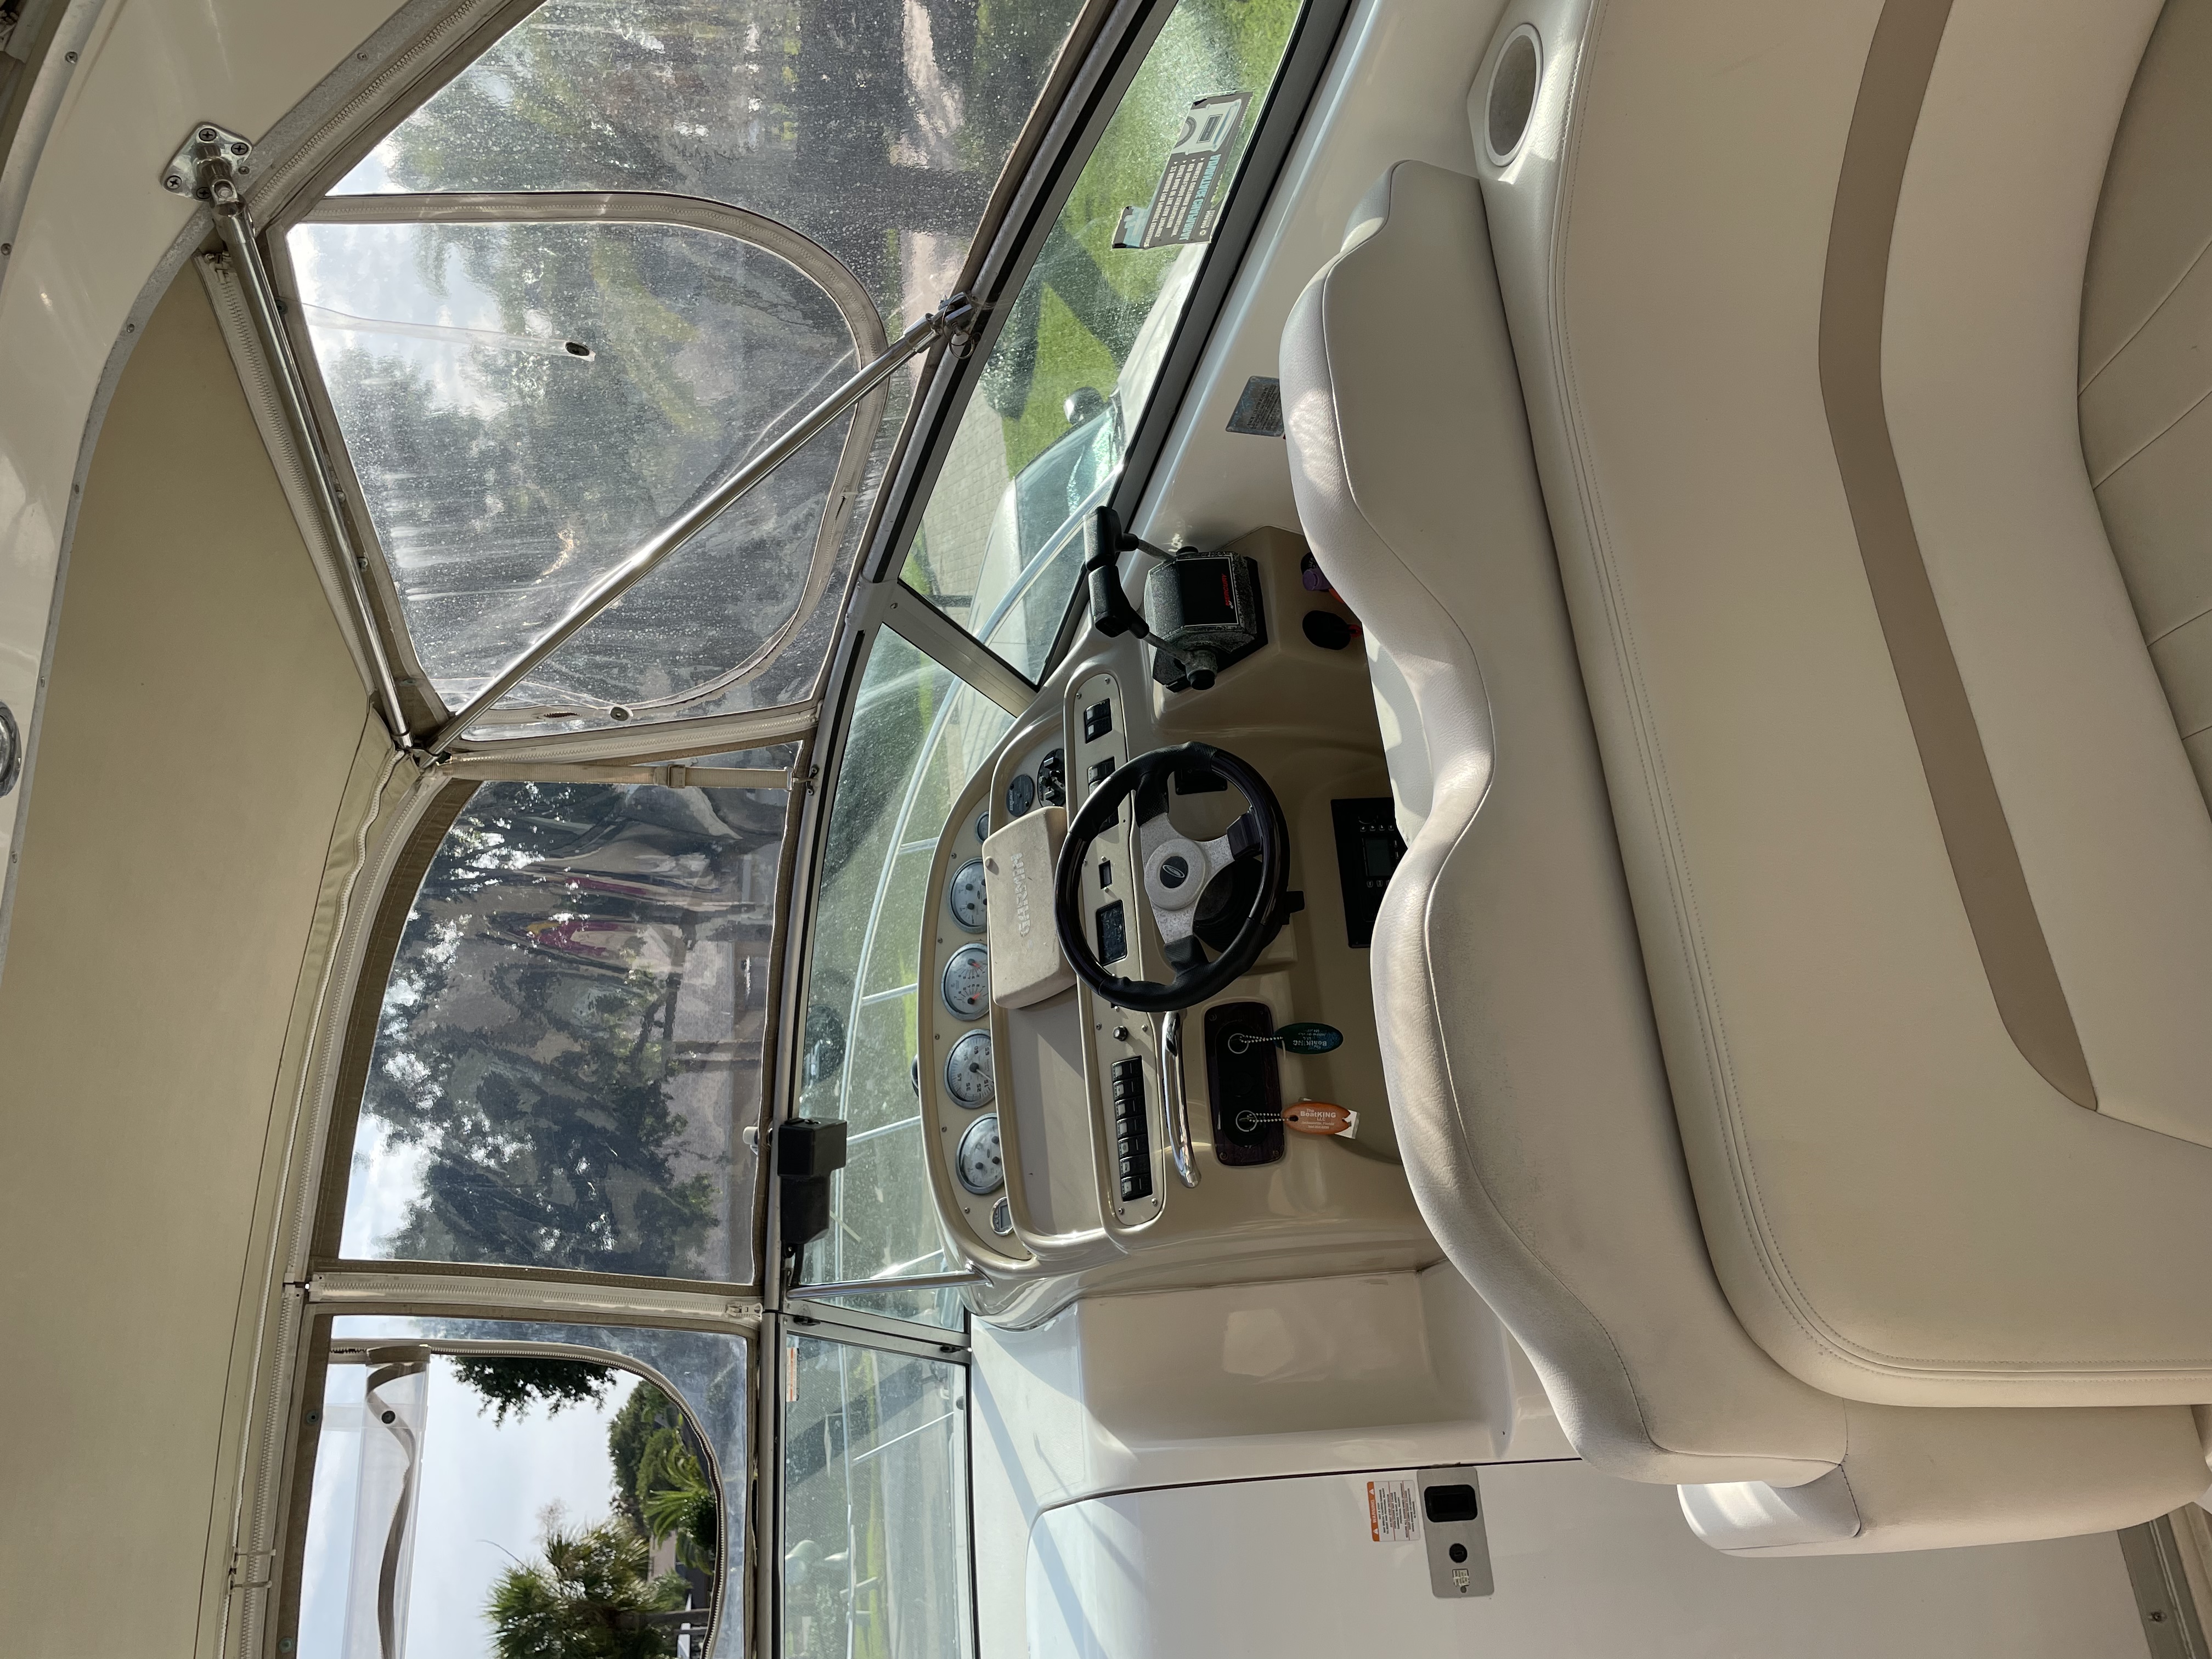 2003 Chaparral Signature 280 Power boat for sale in Jacksonville, FL - image 3 